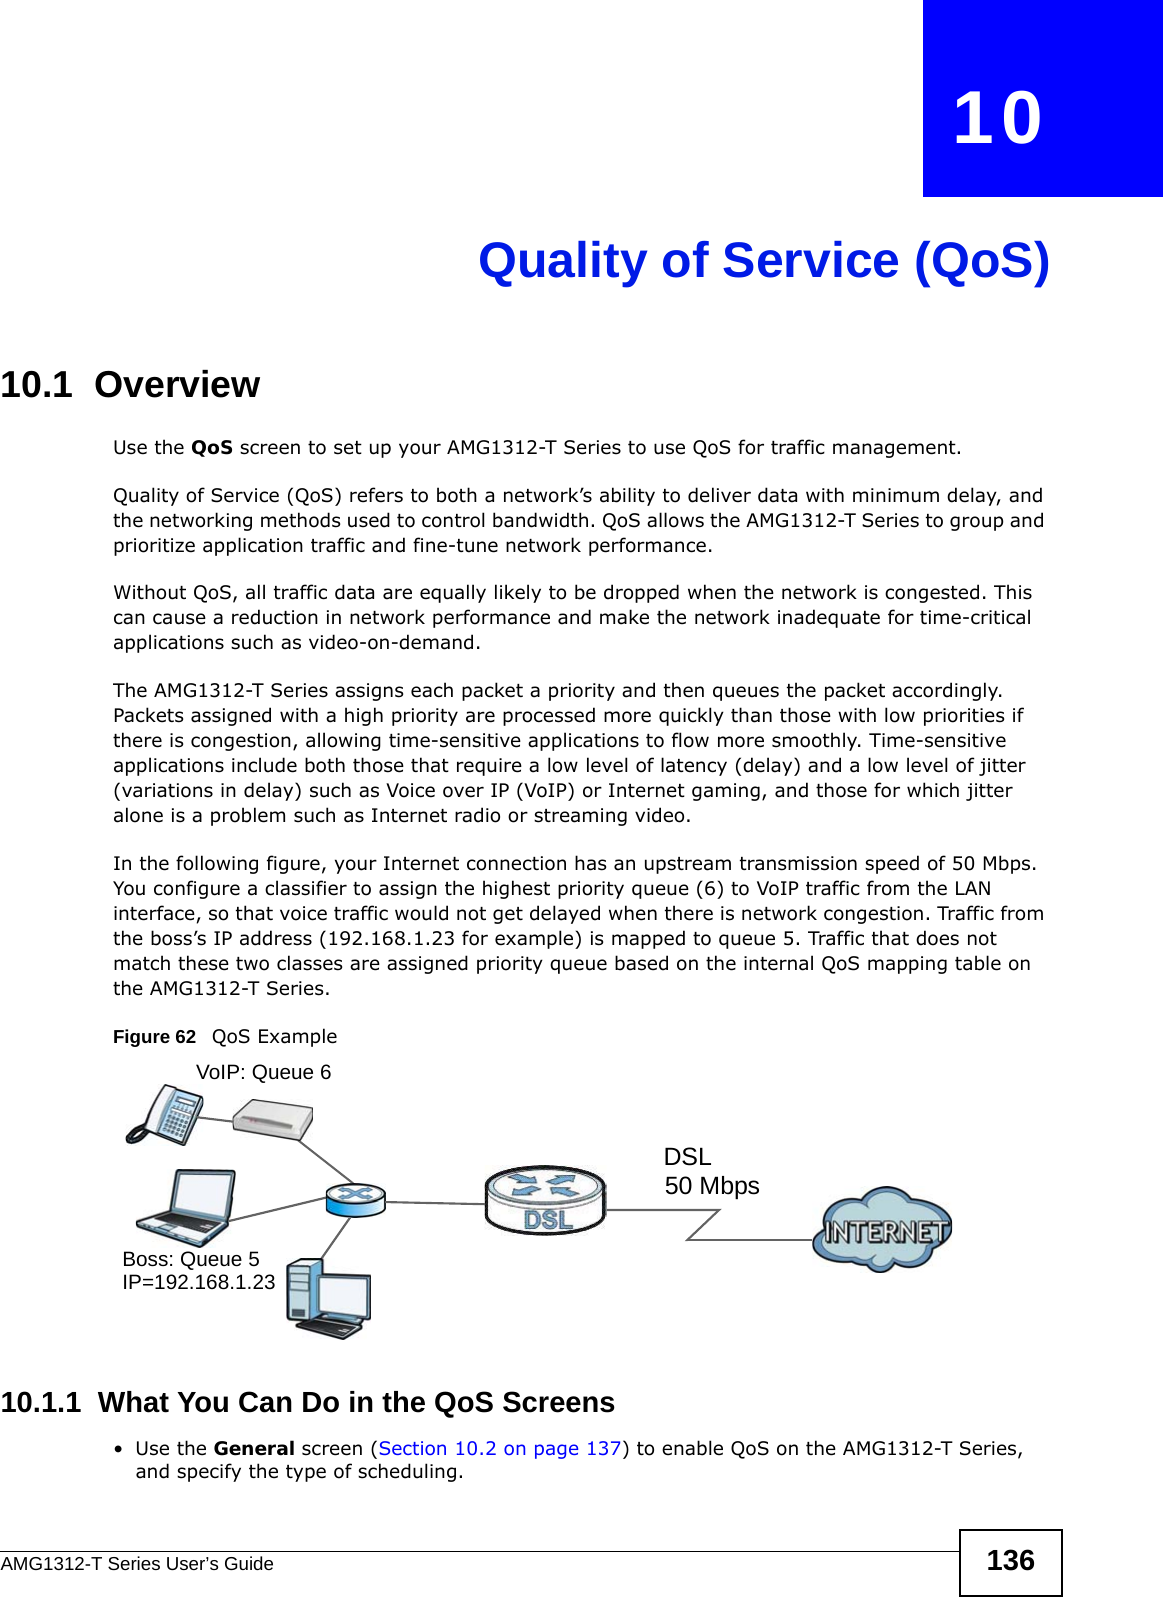 AMG1312-T Series User’s Guide 136CHAPTER   10Quality of Service (QoS)10.1  OverviewUse the QoS screen to set up your AMG1312-T Series to use QoS for traffic management. Quality of Service (QoS) refers to both a network’s ability to deliver data with minimum delay, and the networking methods used to control bandwidth. QoS allows the AMG1312-T Series to group and prioritize application traffic and fine-tune network performance. Without QoS, all traffic data are equally likely to be dropped when the network is congested. This can cause a reduction in network performance and make the network inadequate for time-critical applications such as video-on-demand.The AMG1312-T Series assigns each packet a priority and then queues the packet accordingly. Packets assigned with a high priority are processed more quickly than those with low priorities if there is congestion, allowing time-sensitive applications to flow more smoothly. Time-sensitive applications include both those that require a low level of latency (delay) and a low level of jitter (variations in delay) such as Voice over IP (VoIP) or Internet gaming, and those for which jitter alone is a problem such as Internet radio or streaming video.In the following figure, your Internet connection has an upstream transmission speed of 50 Mbps. You configure a classifier to assign the highest priority queue (6) to VoIP traffic from the LAN interface, so that voice traffic would not get delayed when there is network congestion. Traffic from the boss’s IP address (192.168.1.23 for example) is mapped to queue 5. Traffic that does not match these two classes are assigned priority queue based on the internal QoS mapping table on the AMG1312-T Series.Figure 62   QoS Example10.1.1  What You Can Do in the QoS Screens•Use the General screen (Section 10.2 on page 137) to enable QoS on the AMG1312-T Series, and specify the type of scheduling.50 MbpsDSLVoIP: Queue 6Boss: Queue 5IP=192.168.1.23